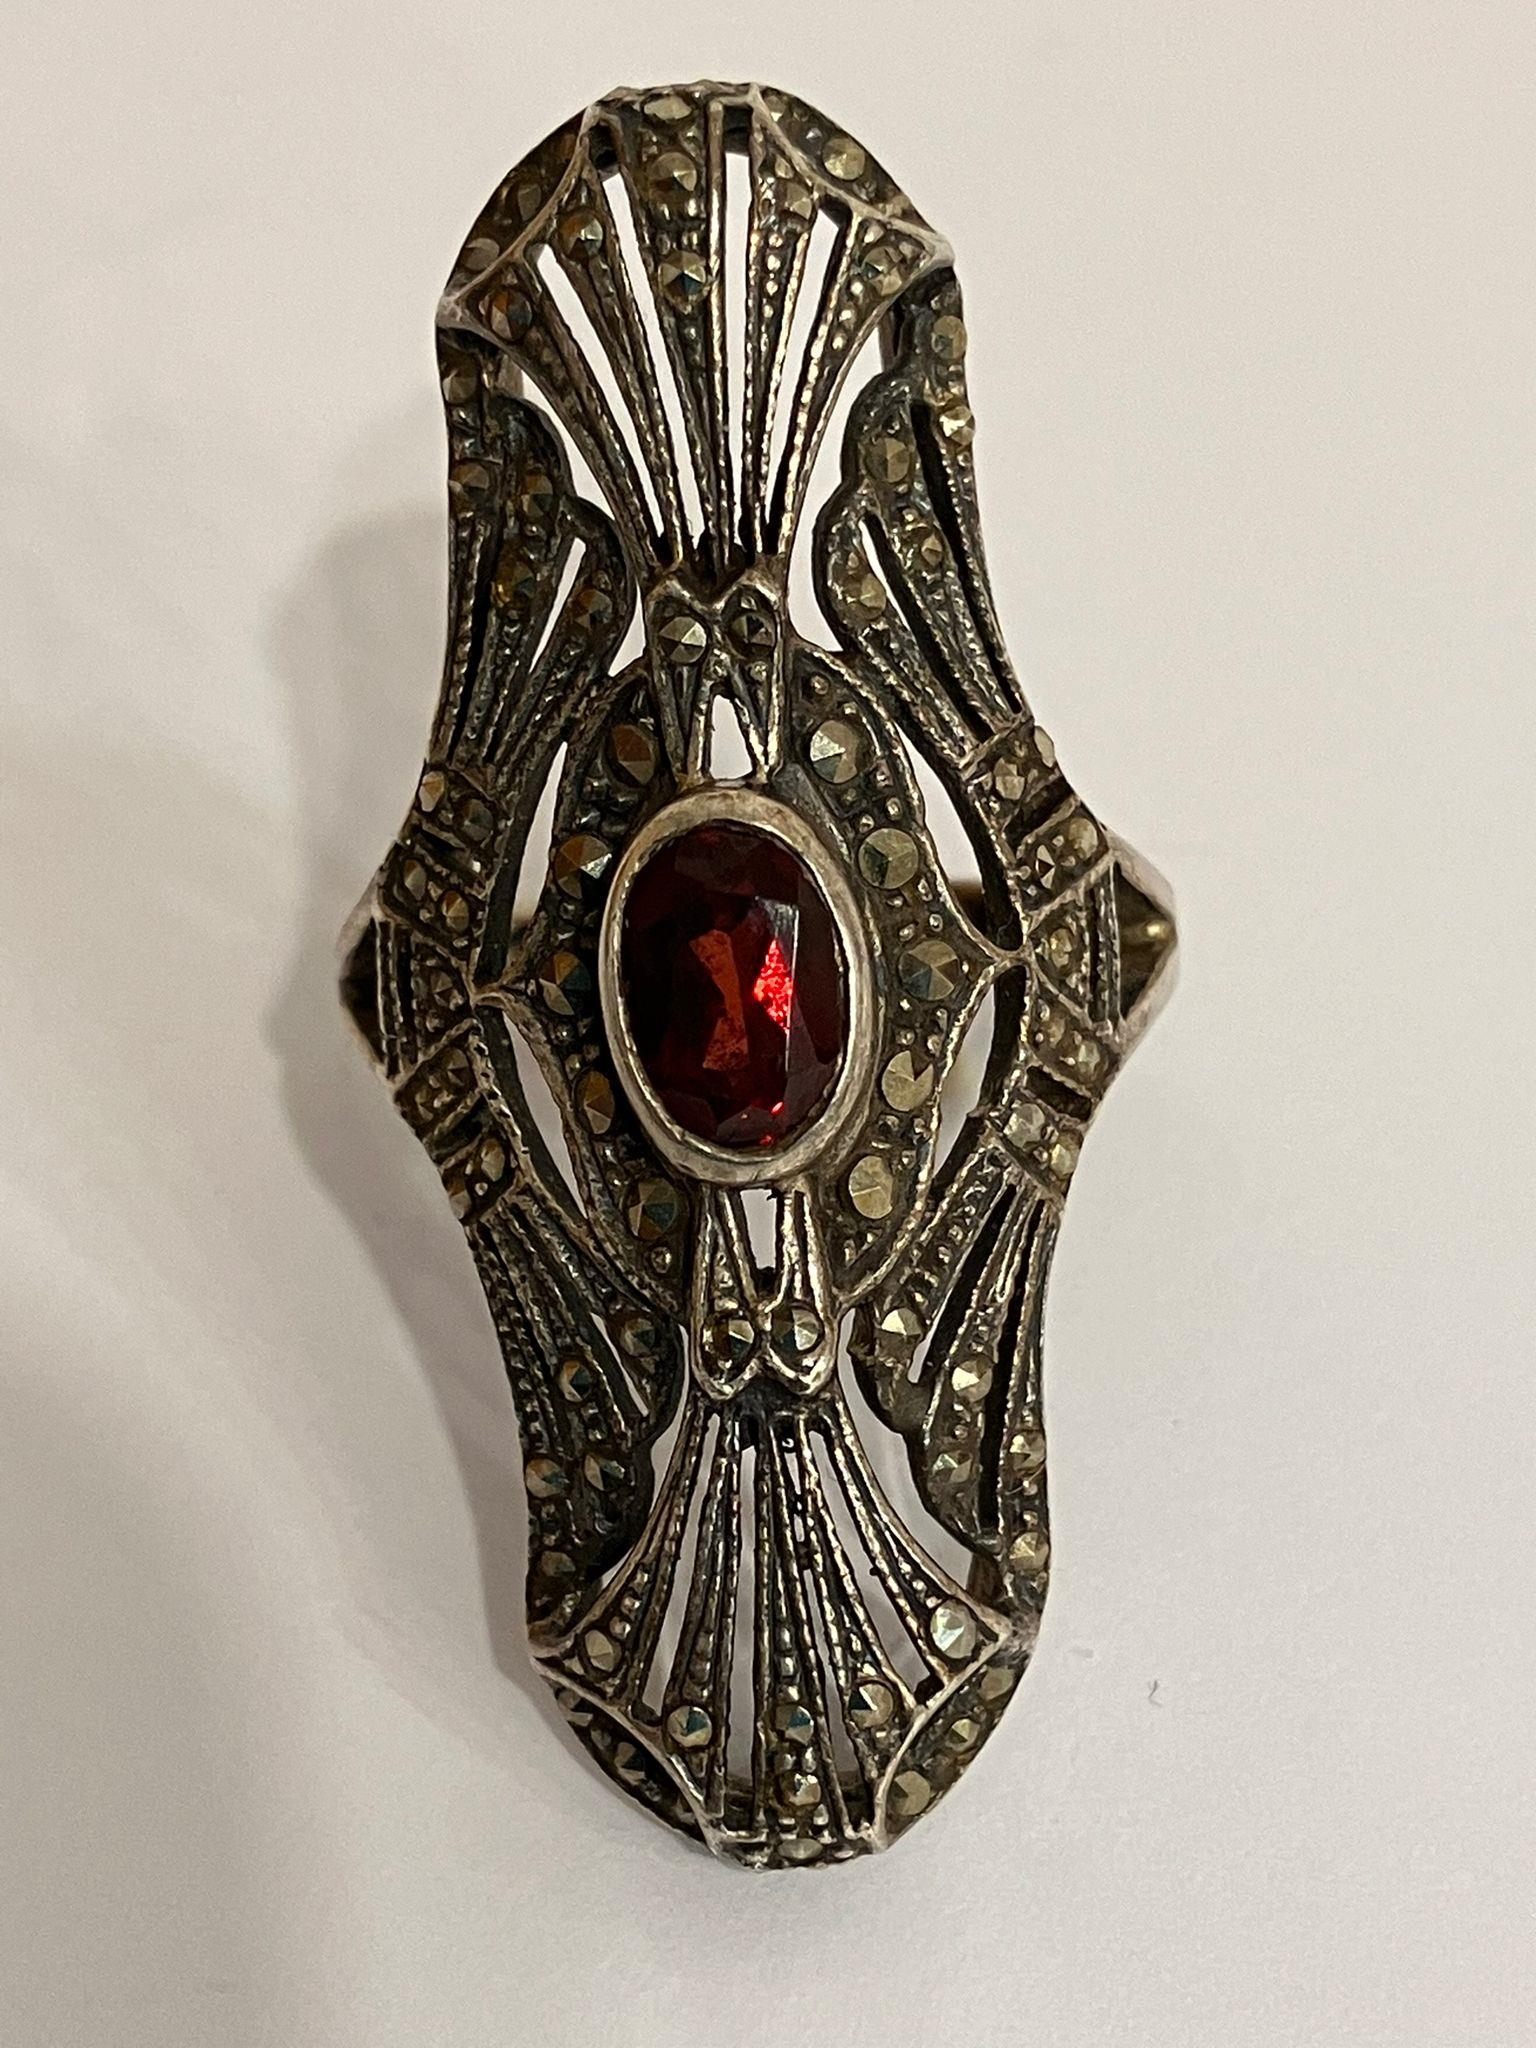 Fabulous vintage SILVER MARCASITE RING in ART DECO STYLE with beautiful Oval Cut GARNET to centre. - Image 4 of 5